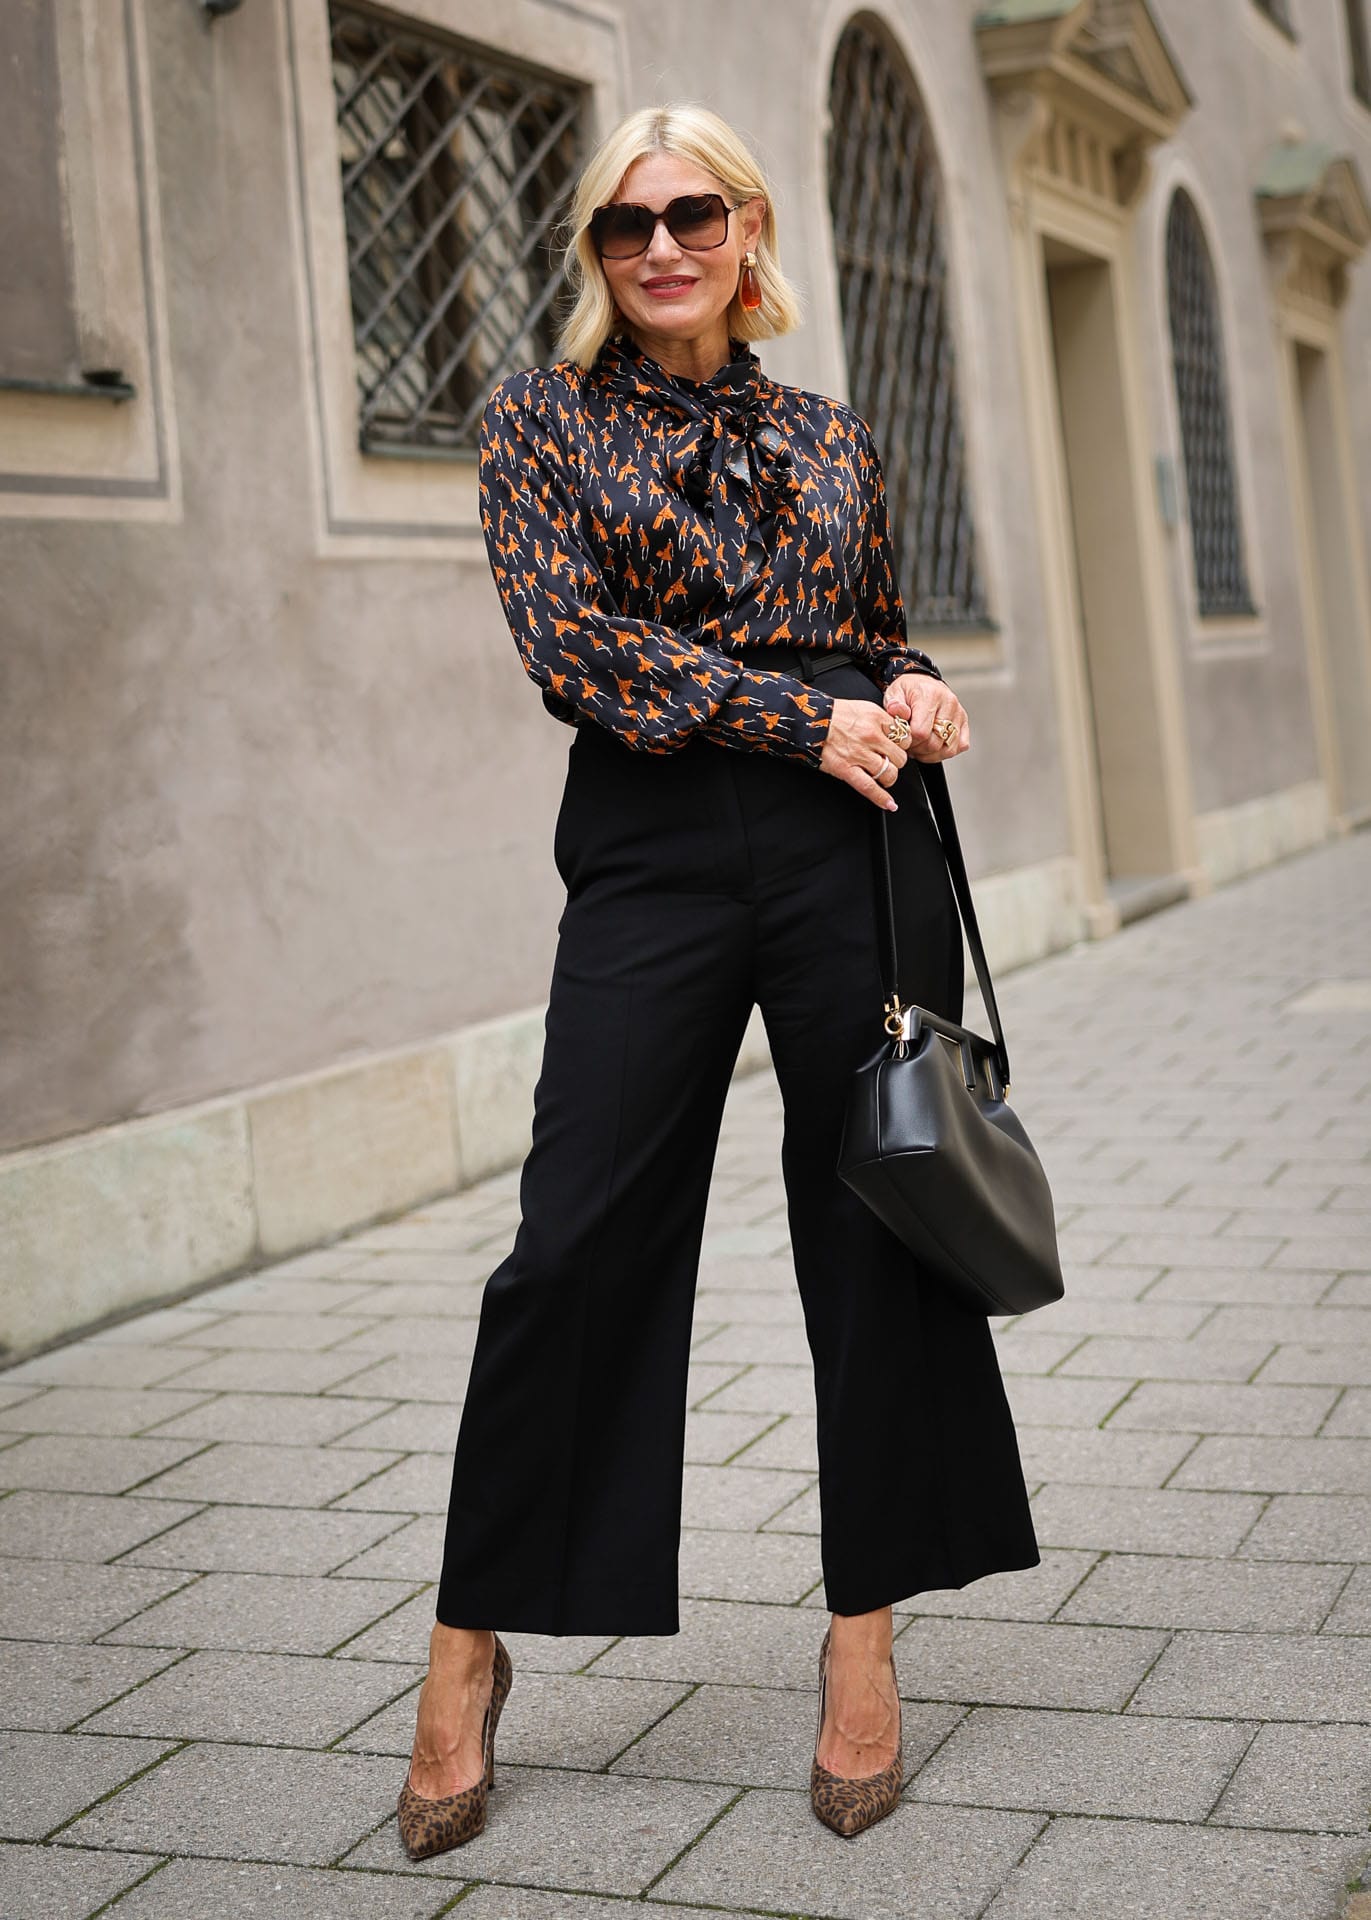 Fashionista black silk blouse with a flap